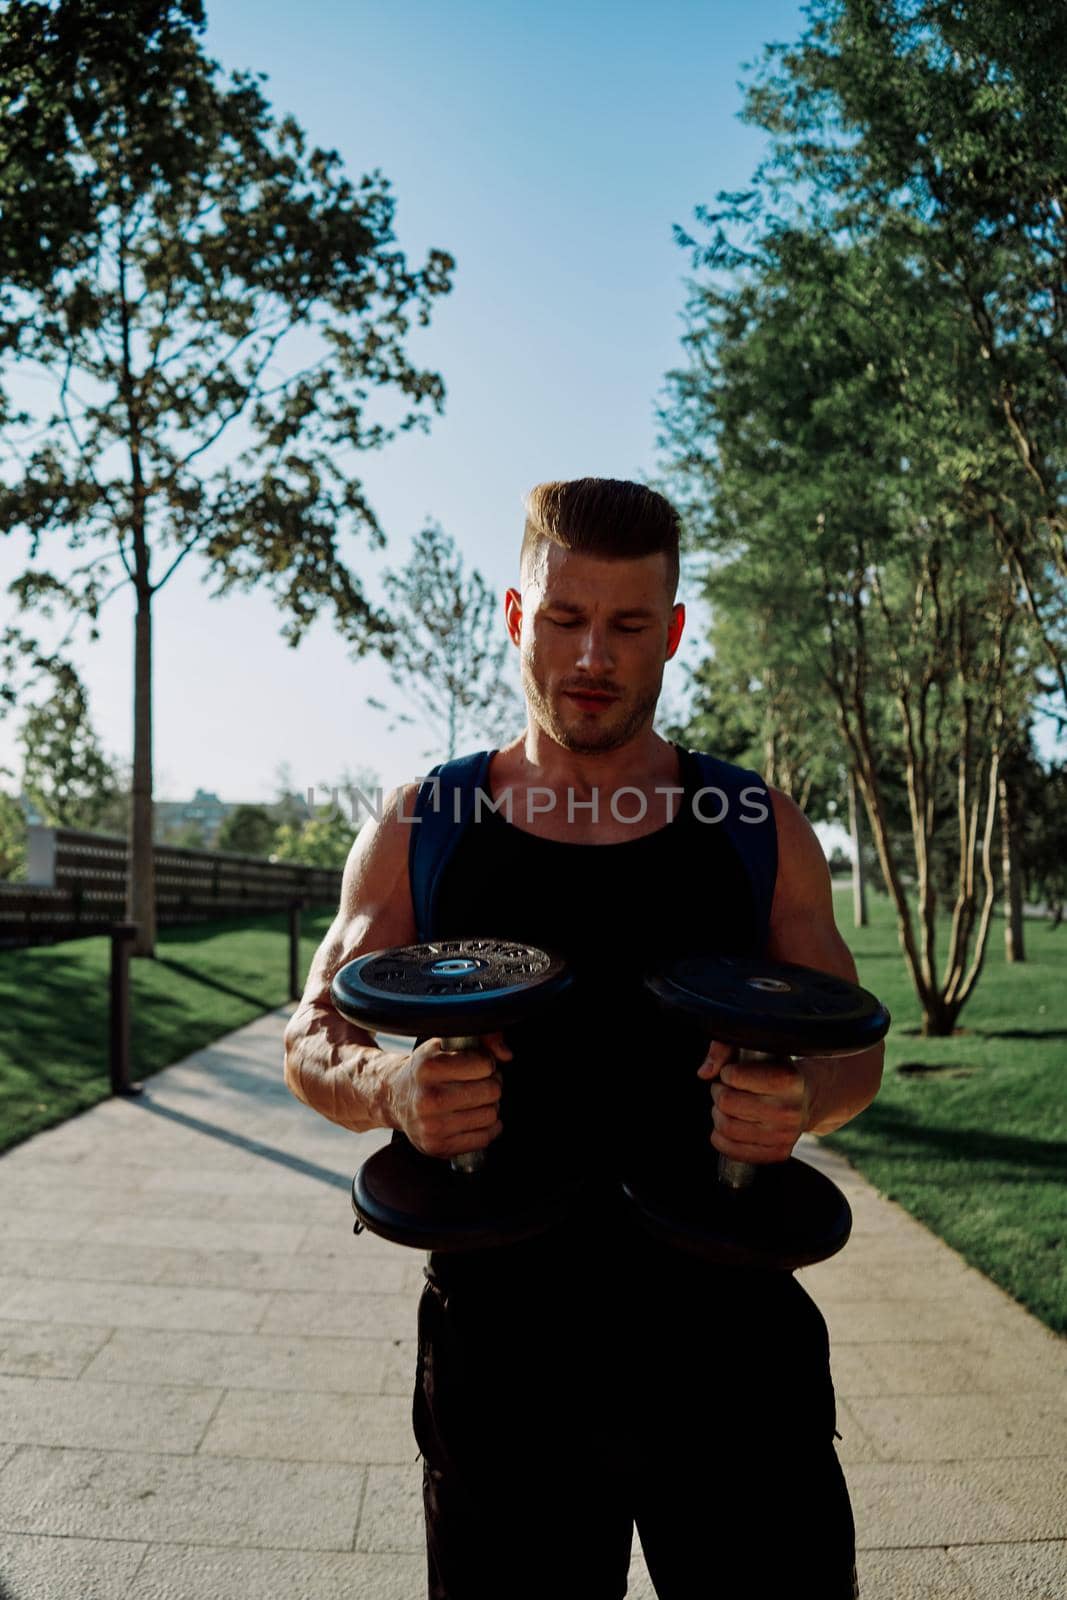 athletic man with dumbbells in his hands in the park training lifestyle. High quality photo